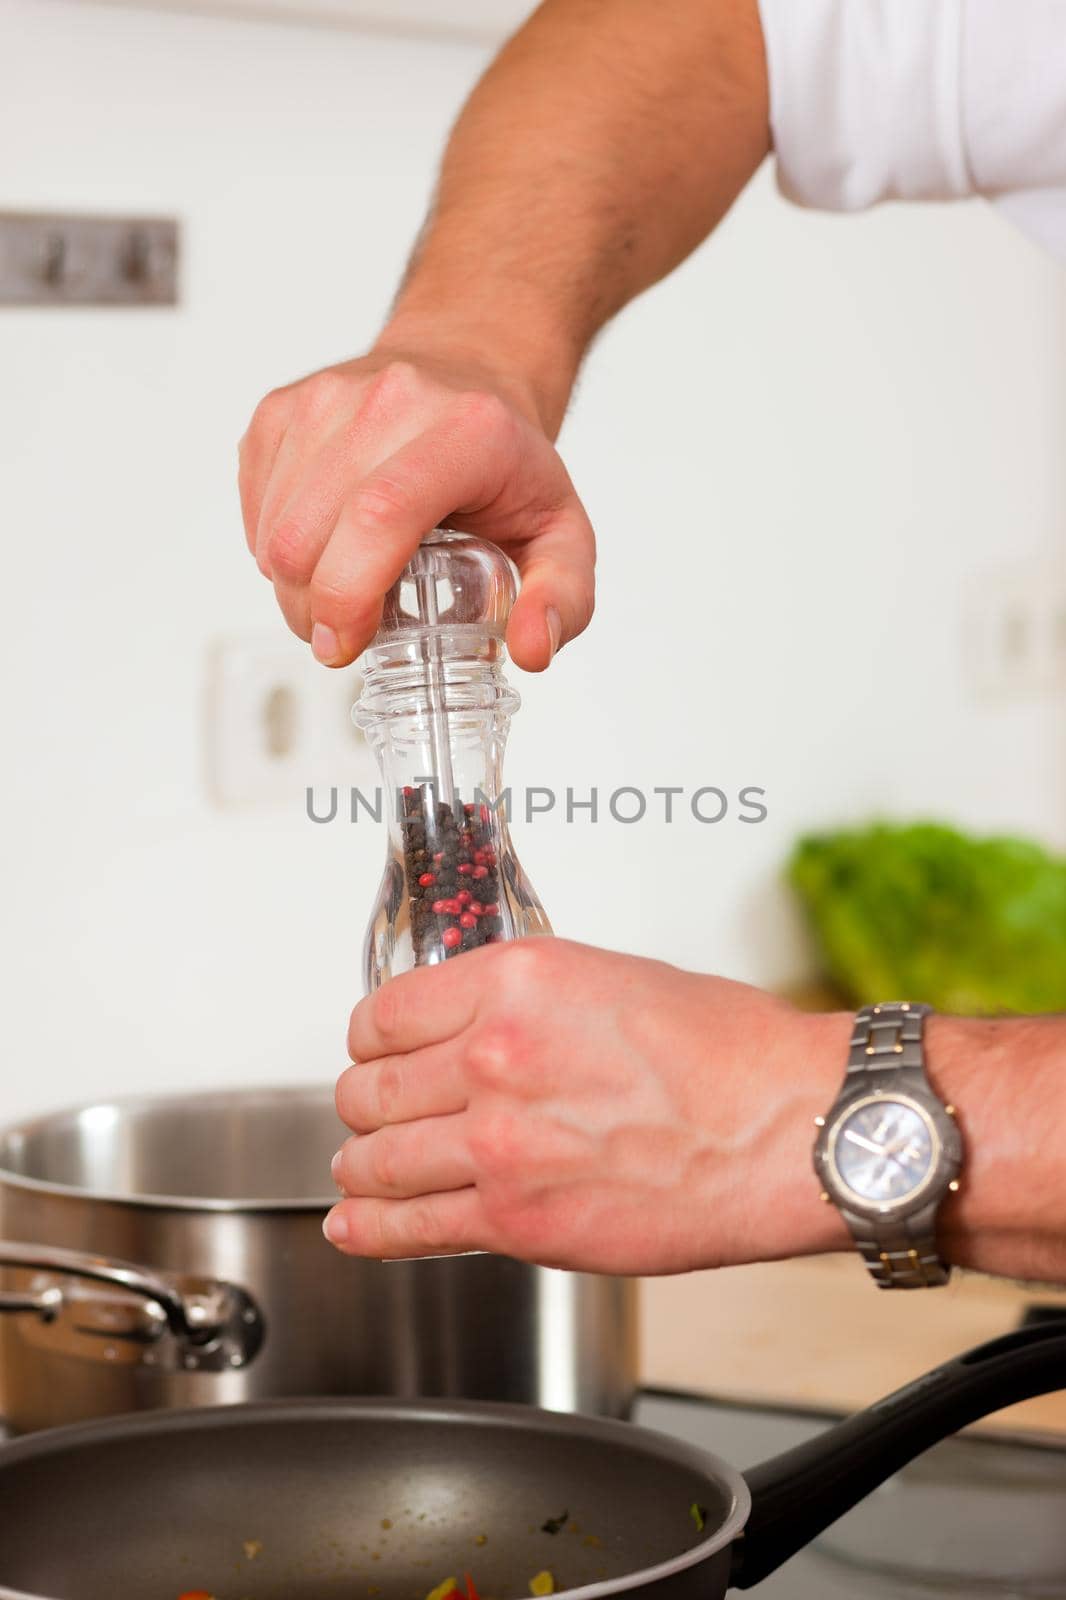 Man in the kitchen - only hands to be seen - is adding spices to food